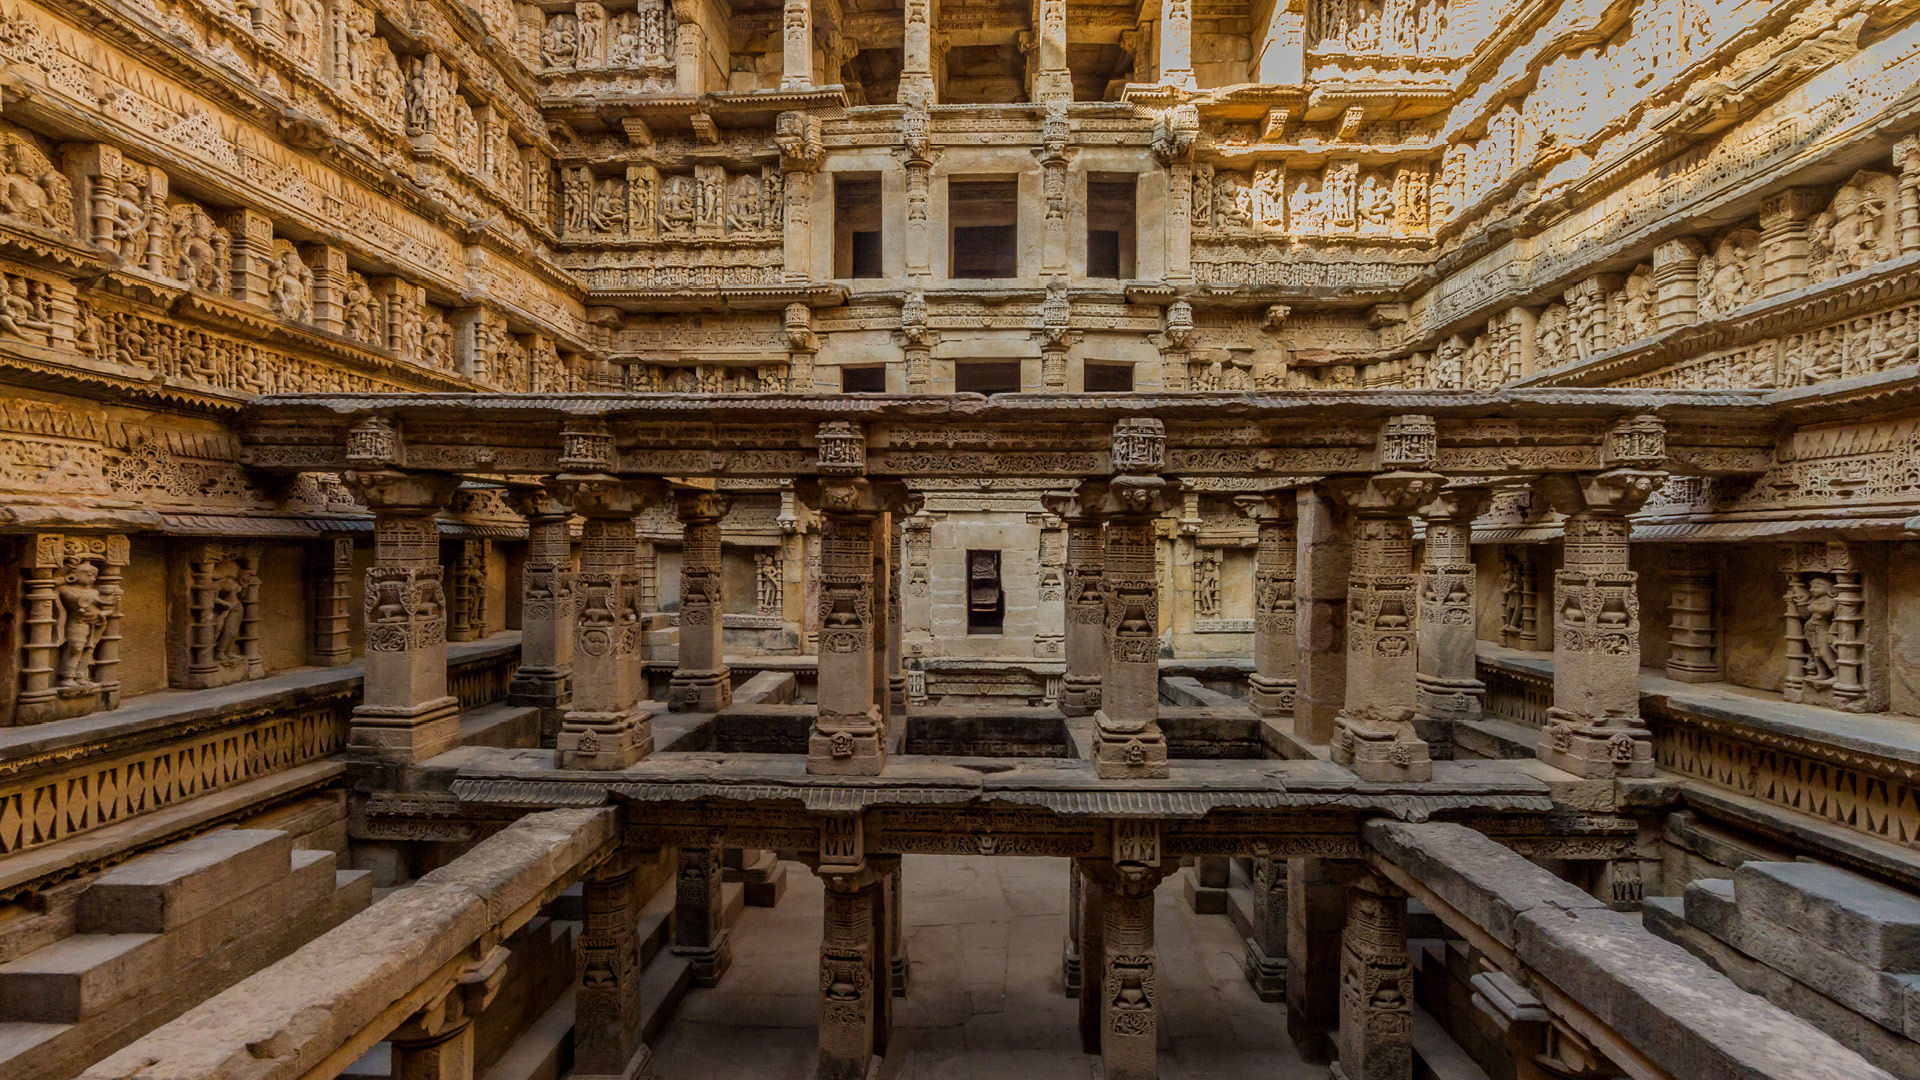 Gujarat's Patan:A Must-Visit Place To Learn About India's Rich Heritag